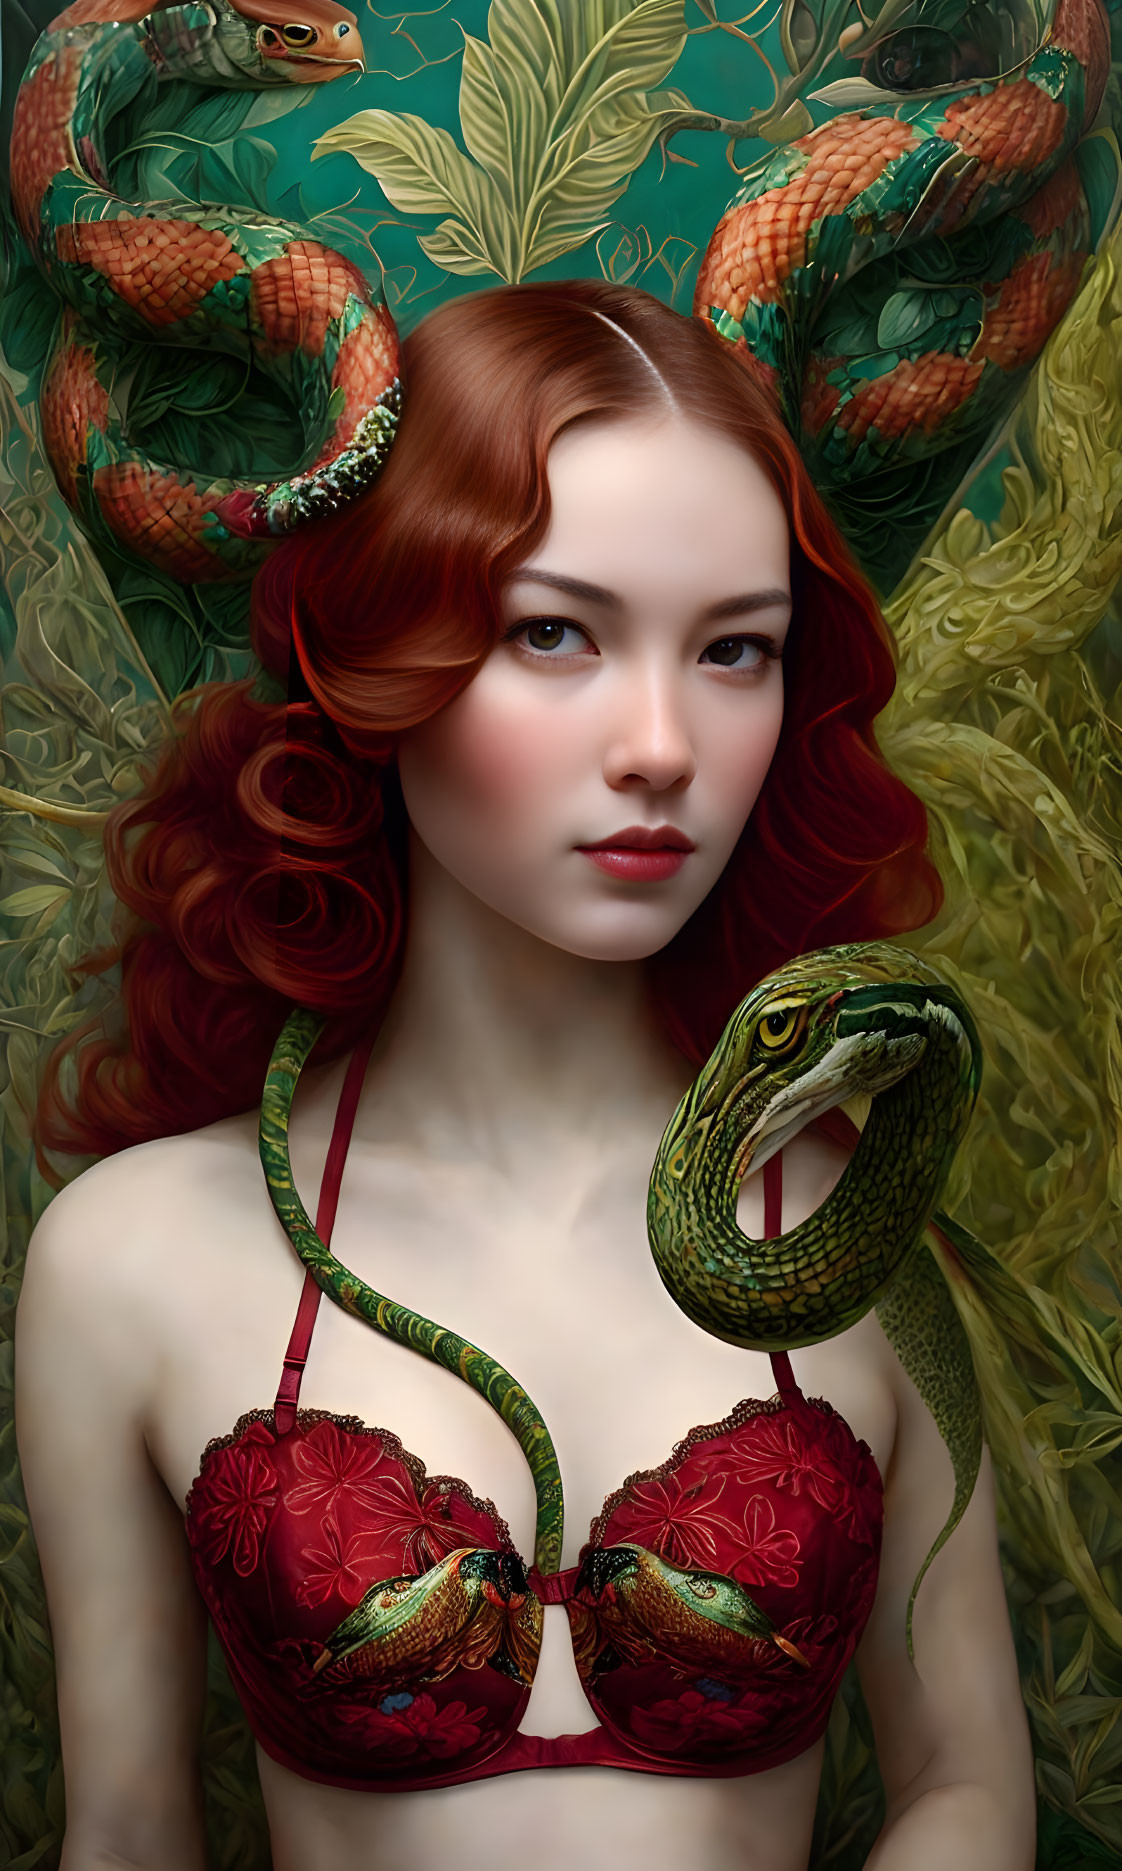 Red-haired woman with snake in enchanted setting.